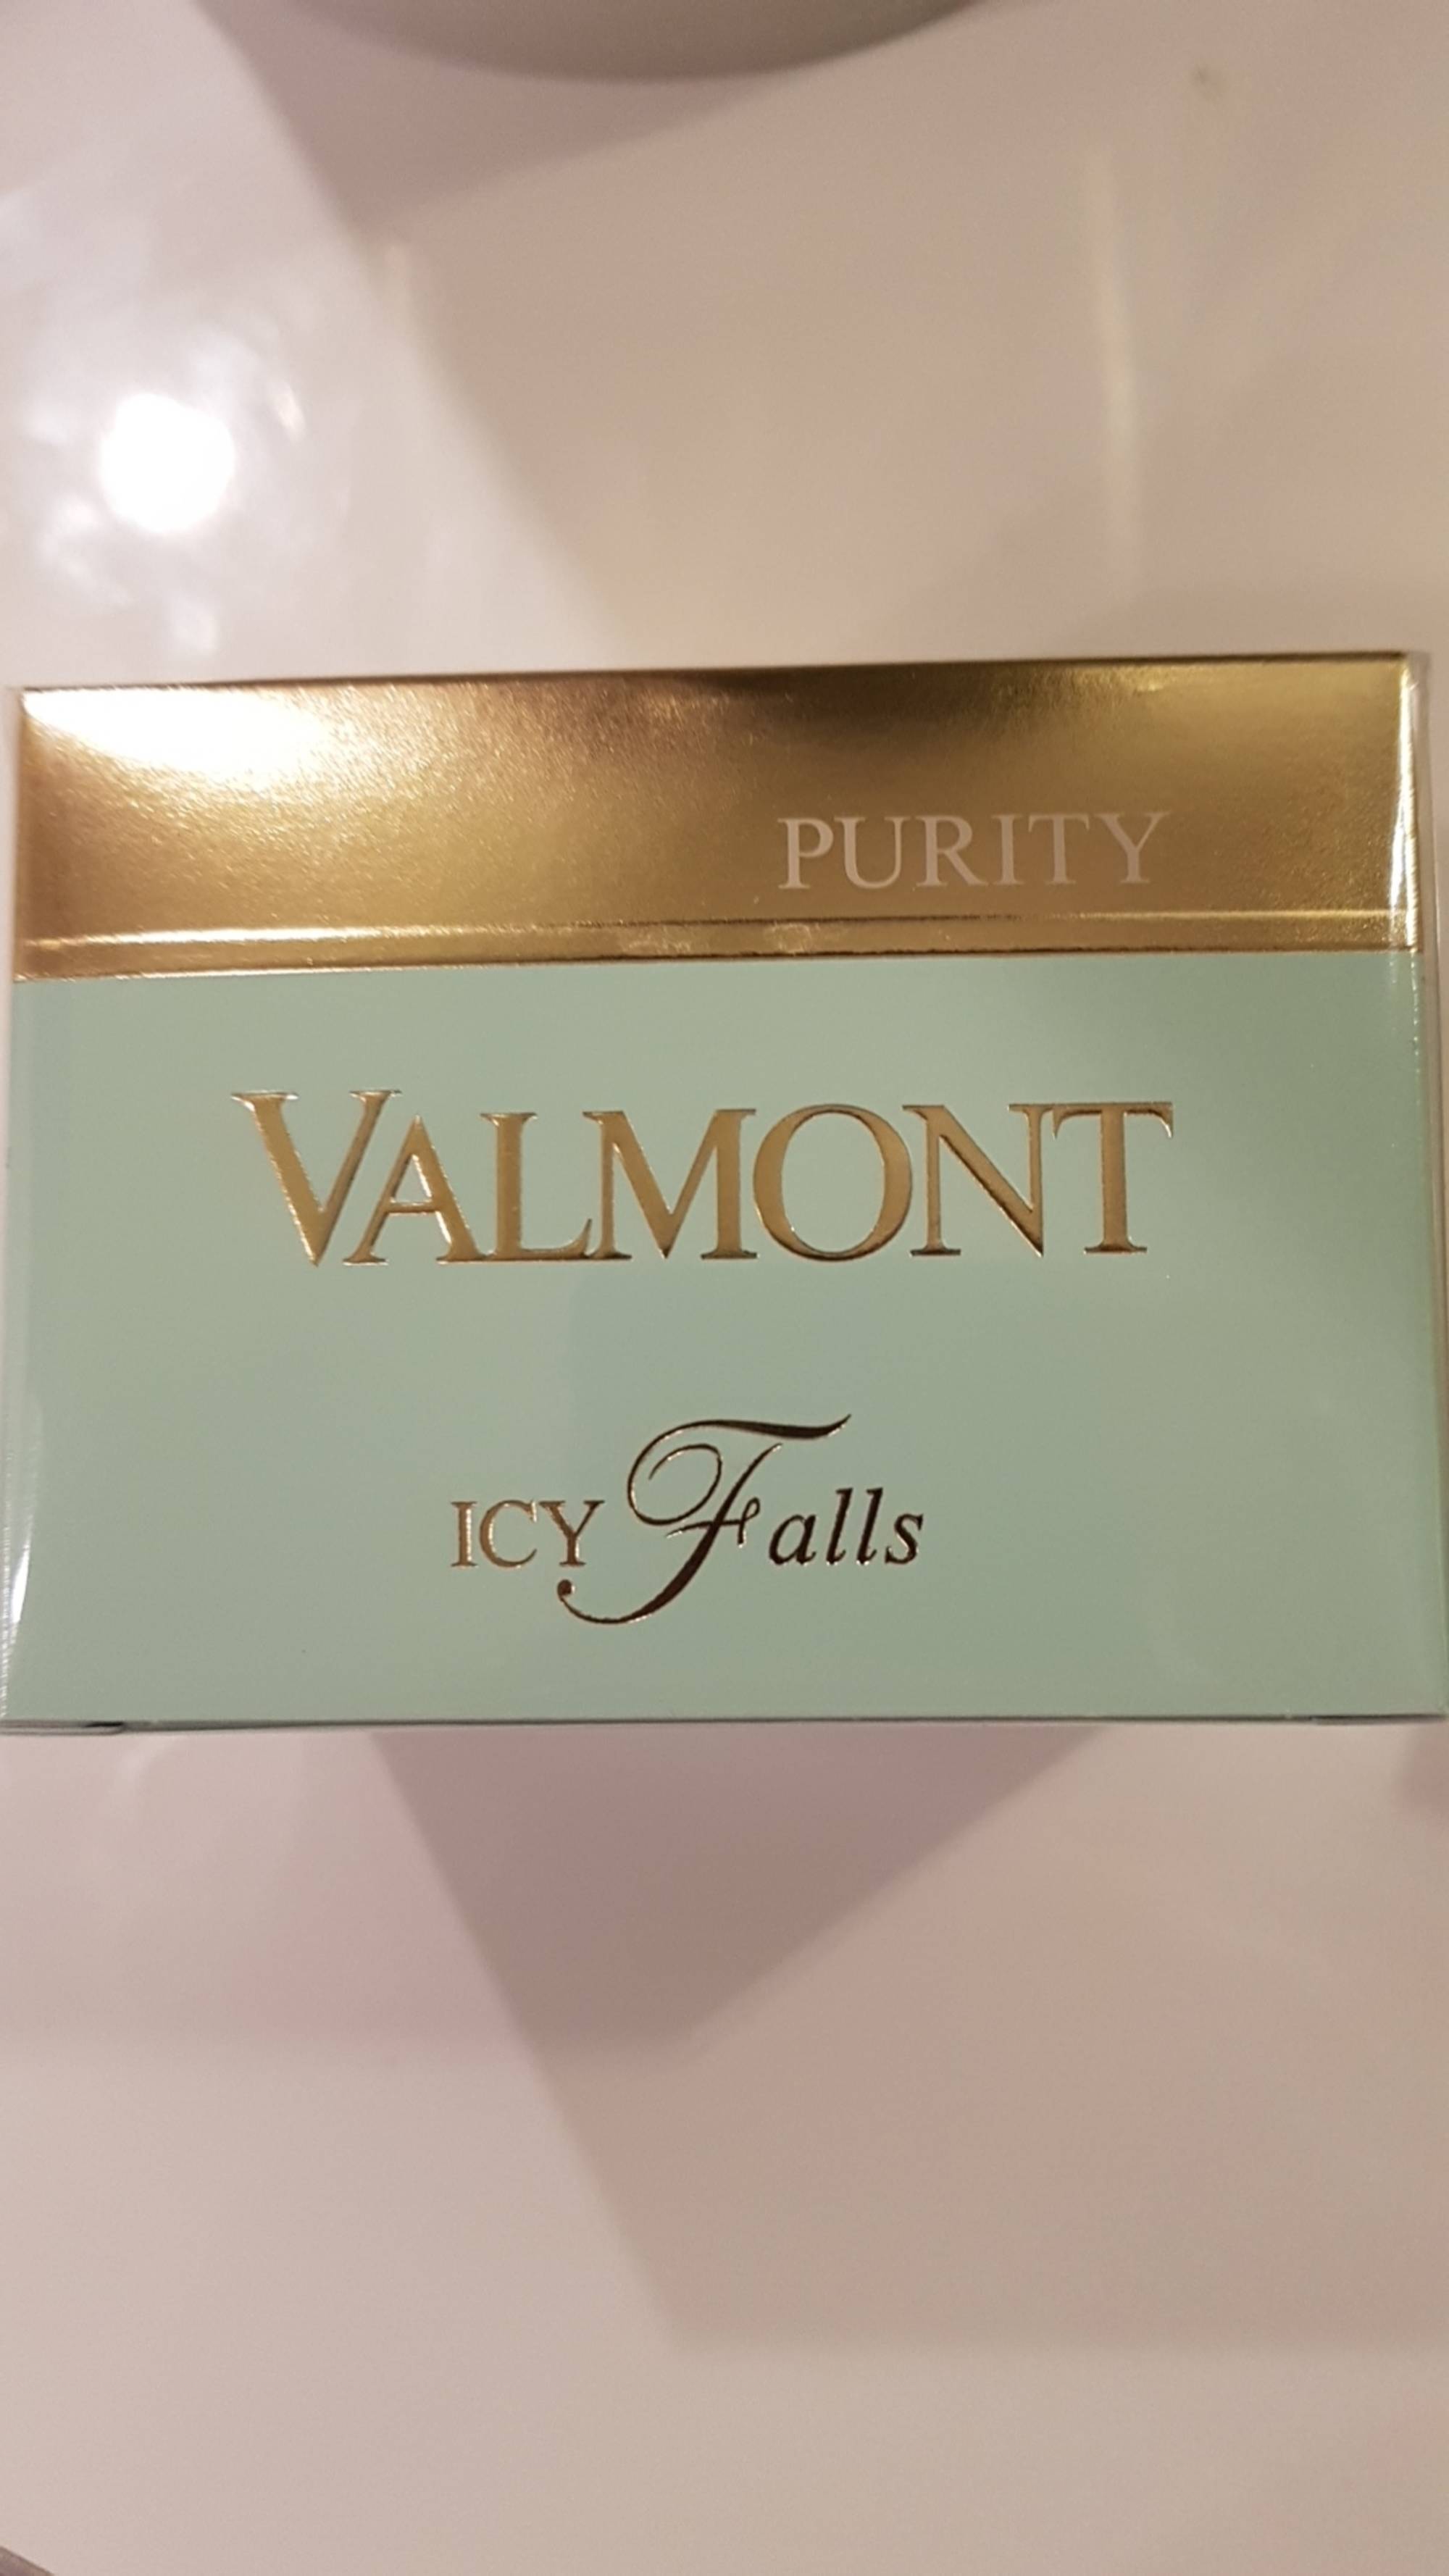 VALMONT - Purity icy falls